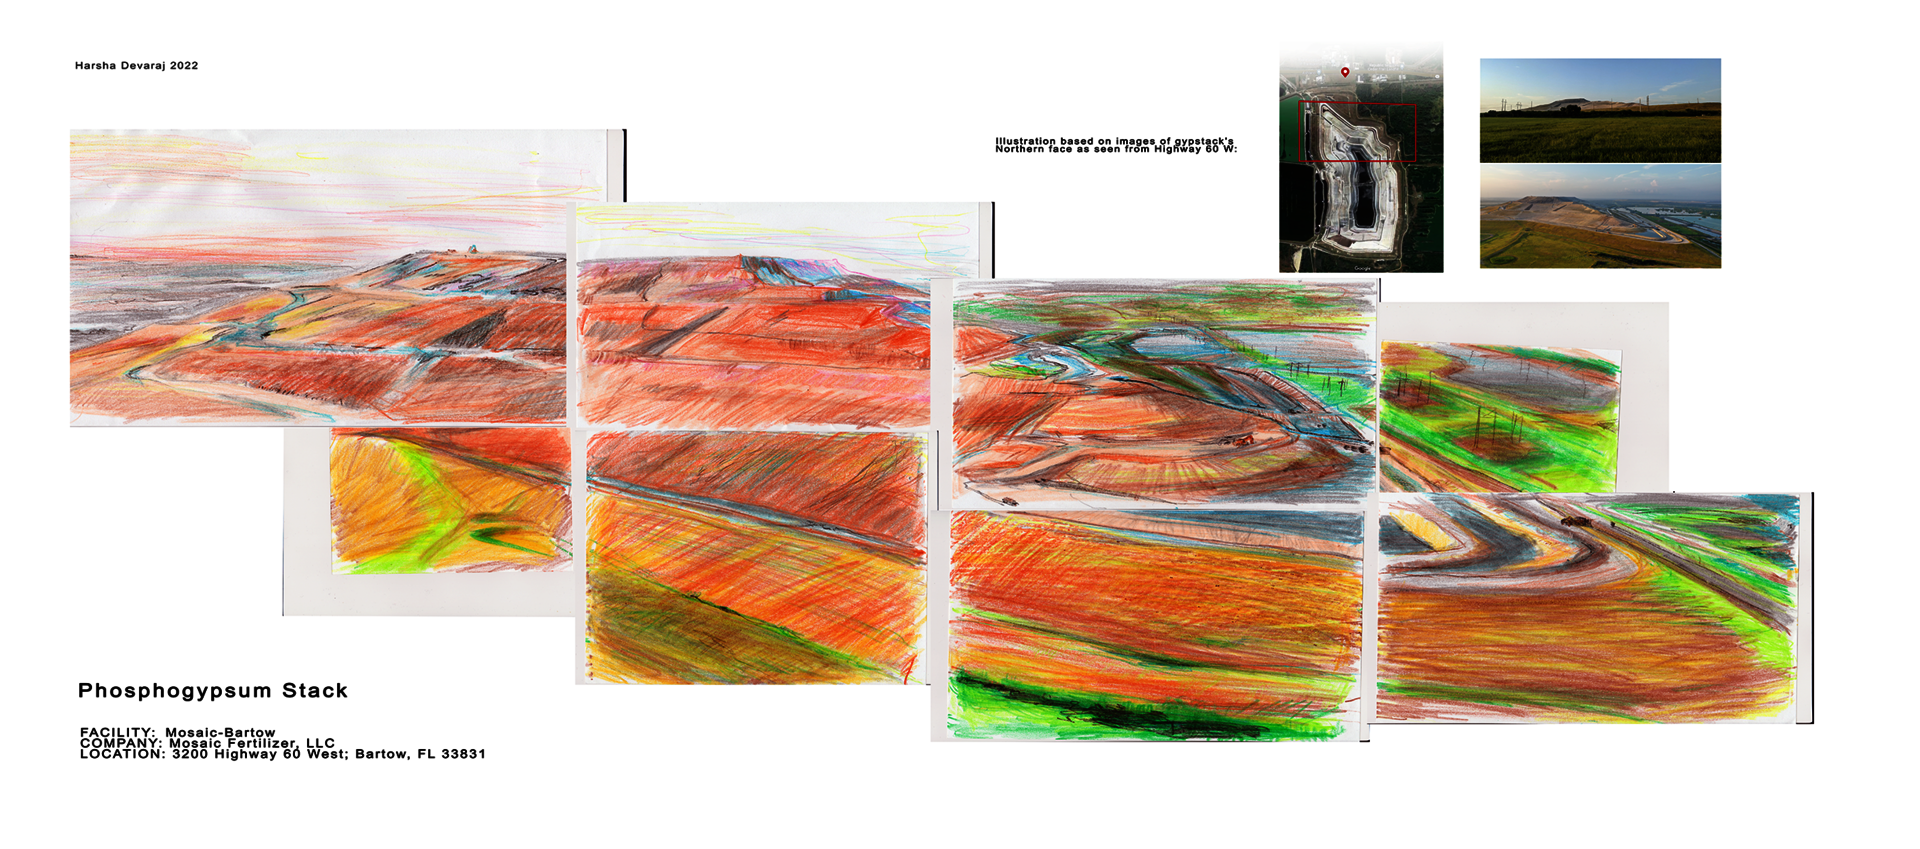 Crayon illustration of a mountain of fertilizer waste. Around the illustration are reference images taken by drone, and a satellite image of the site from Google Maps.